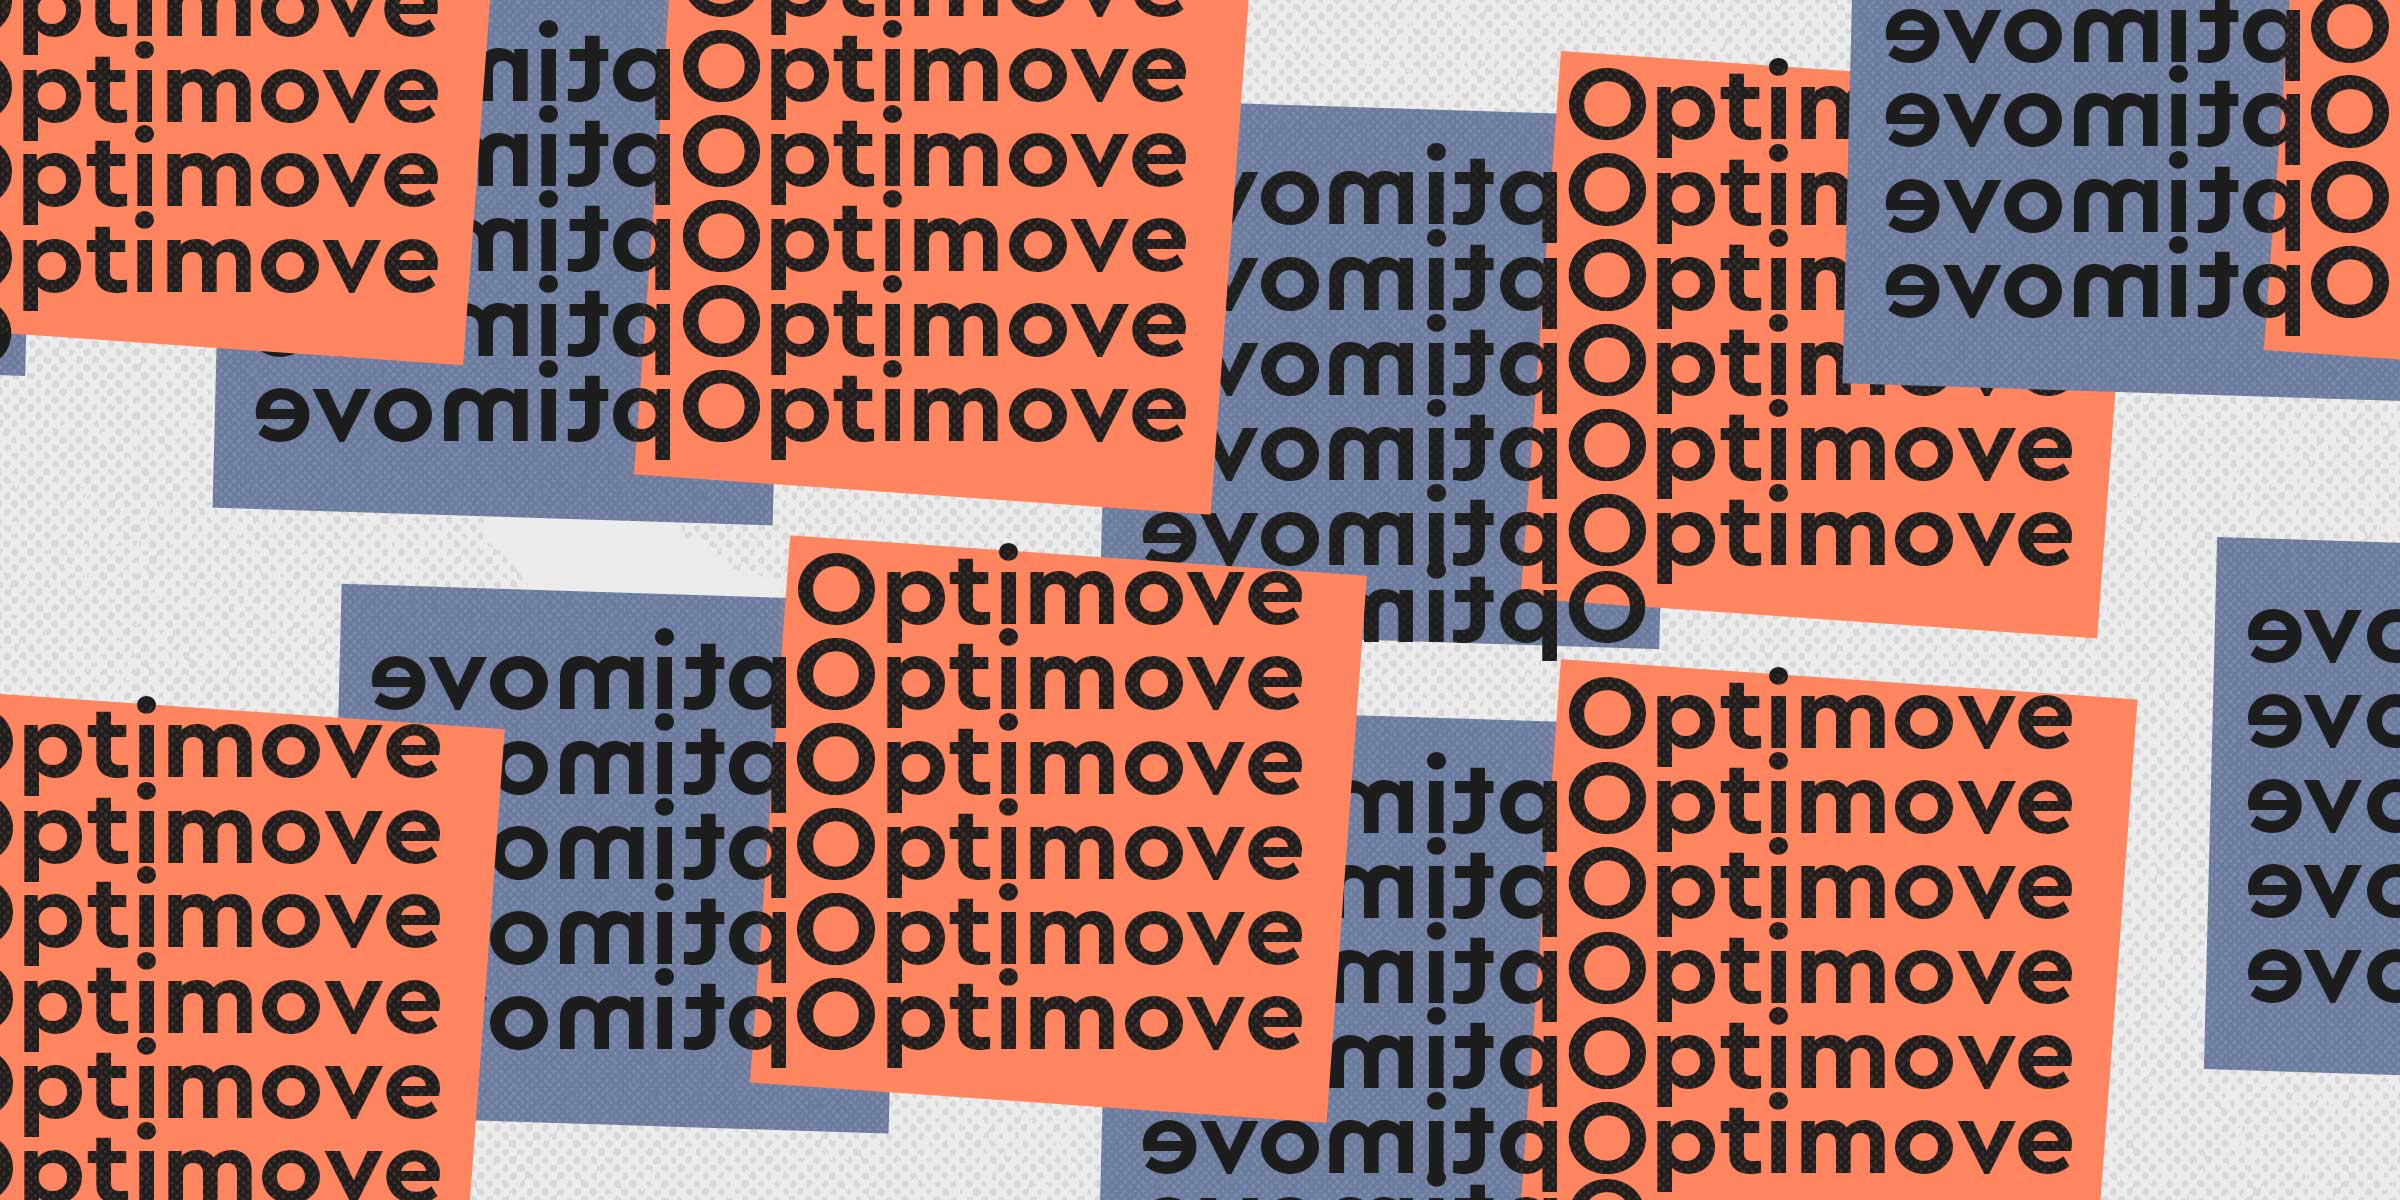 Going from Tens to Hundreds of Customer Segments: Here’s How Optimove is Eating Its Own Dog Food